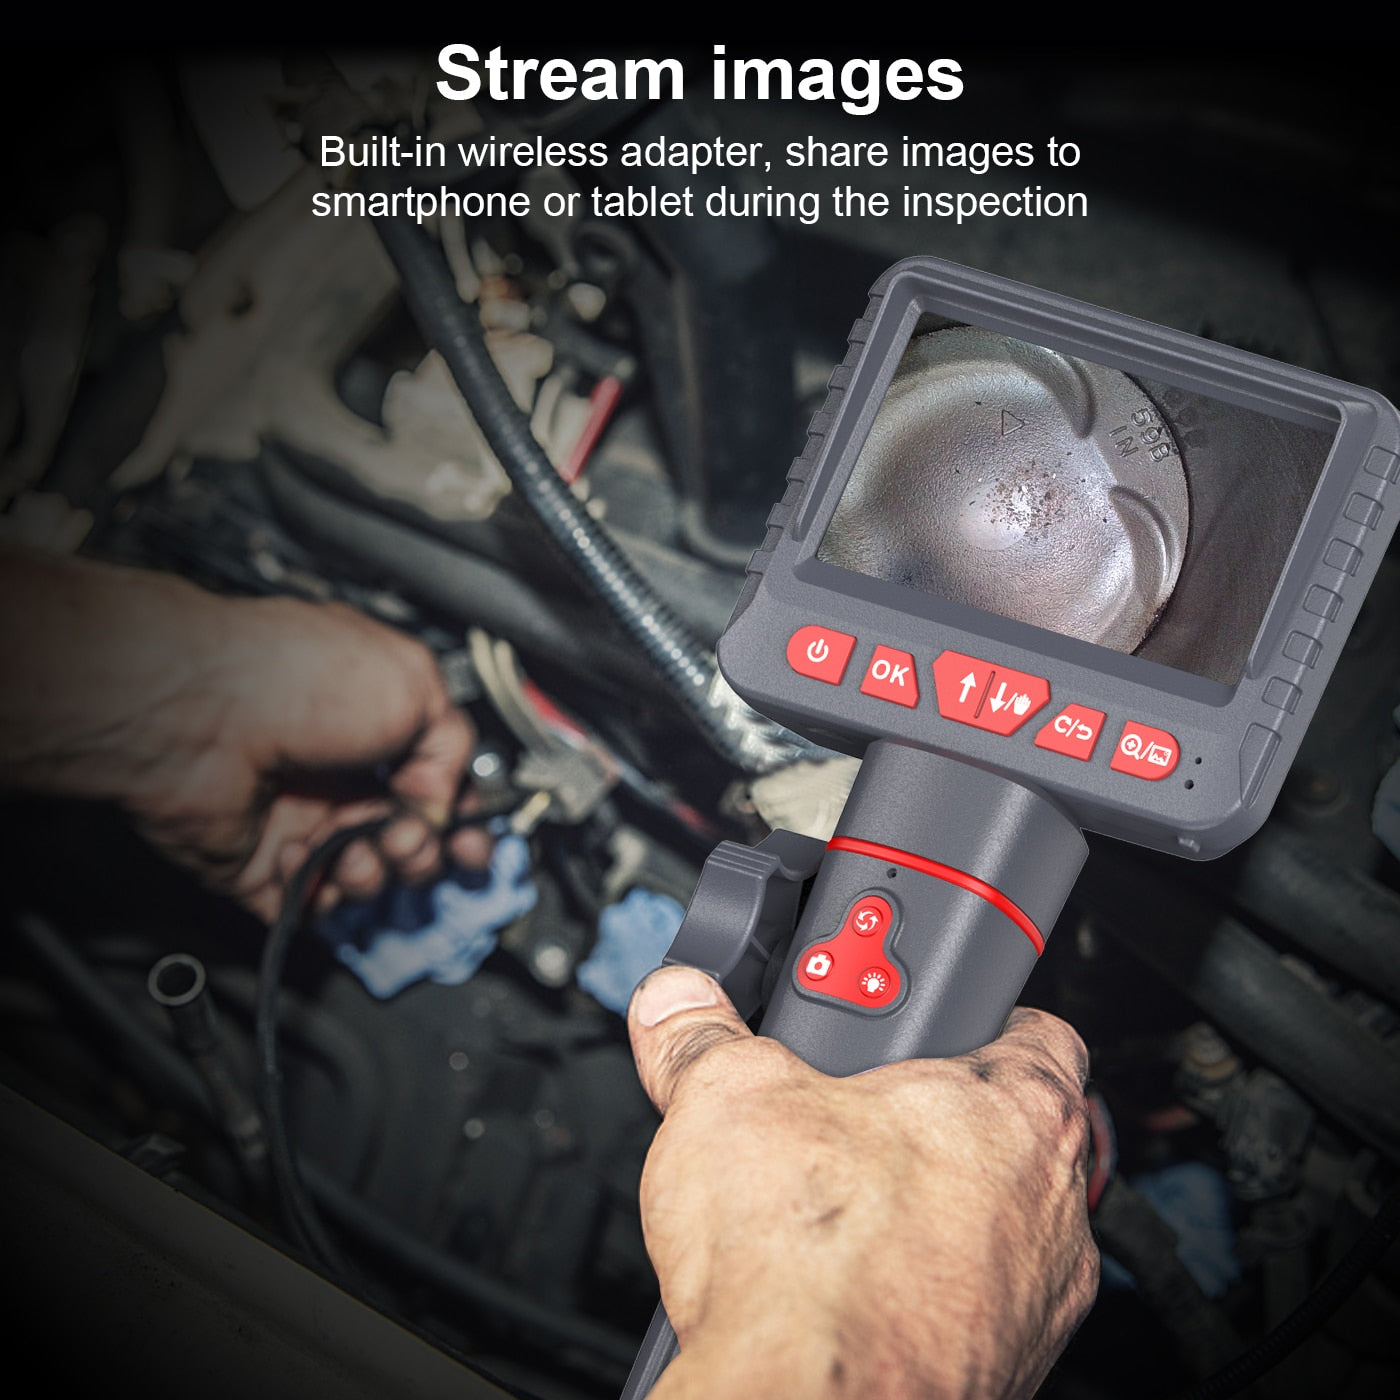 Borescope Inspection Camera - 4.3" Screen with 2 Way 180 Degree 6mm or 8mm waterproof probe